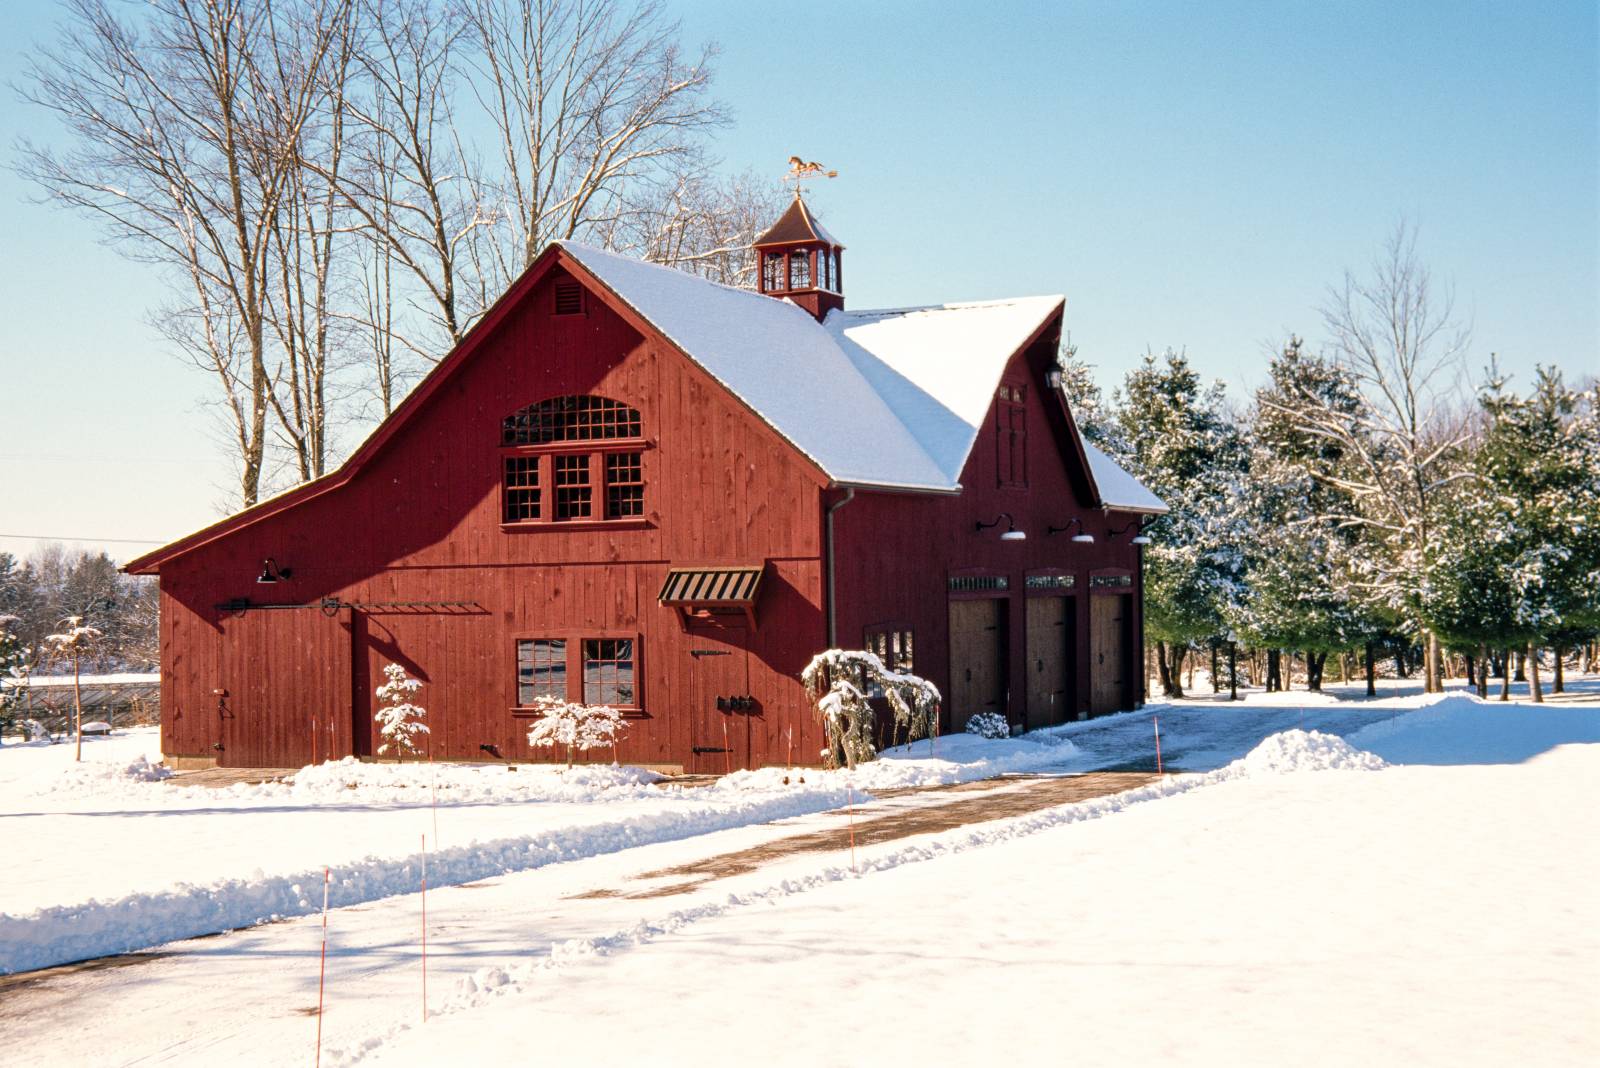 Plowed driveway leading to the red barn with an enclosed lean-to and reverse gable dormer